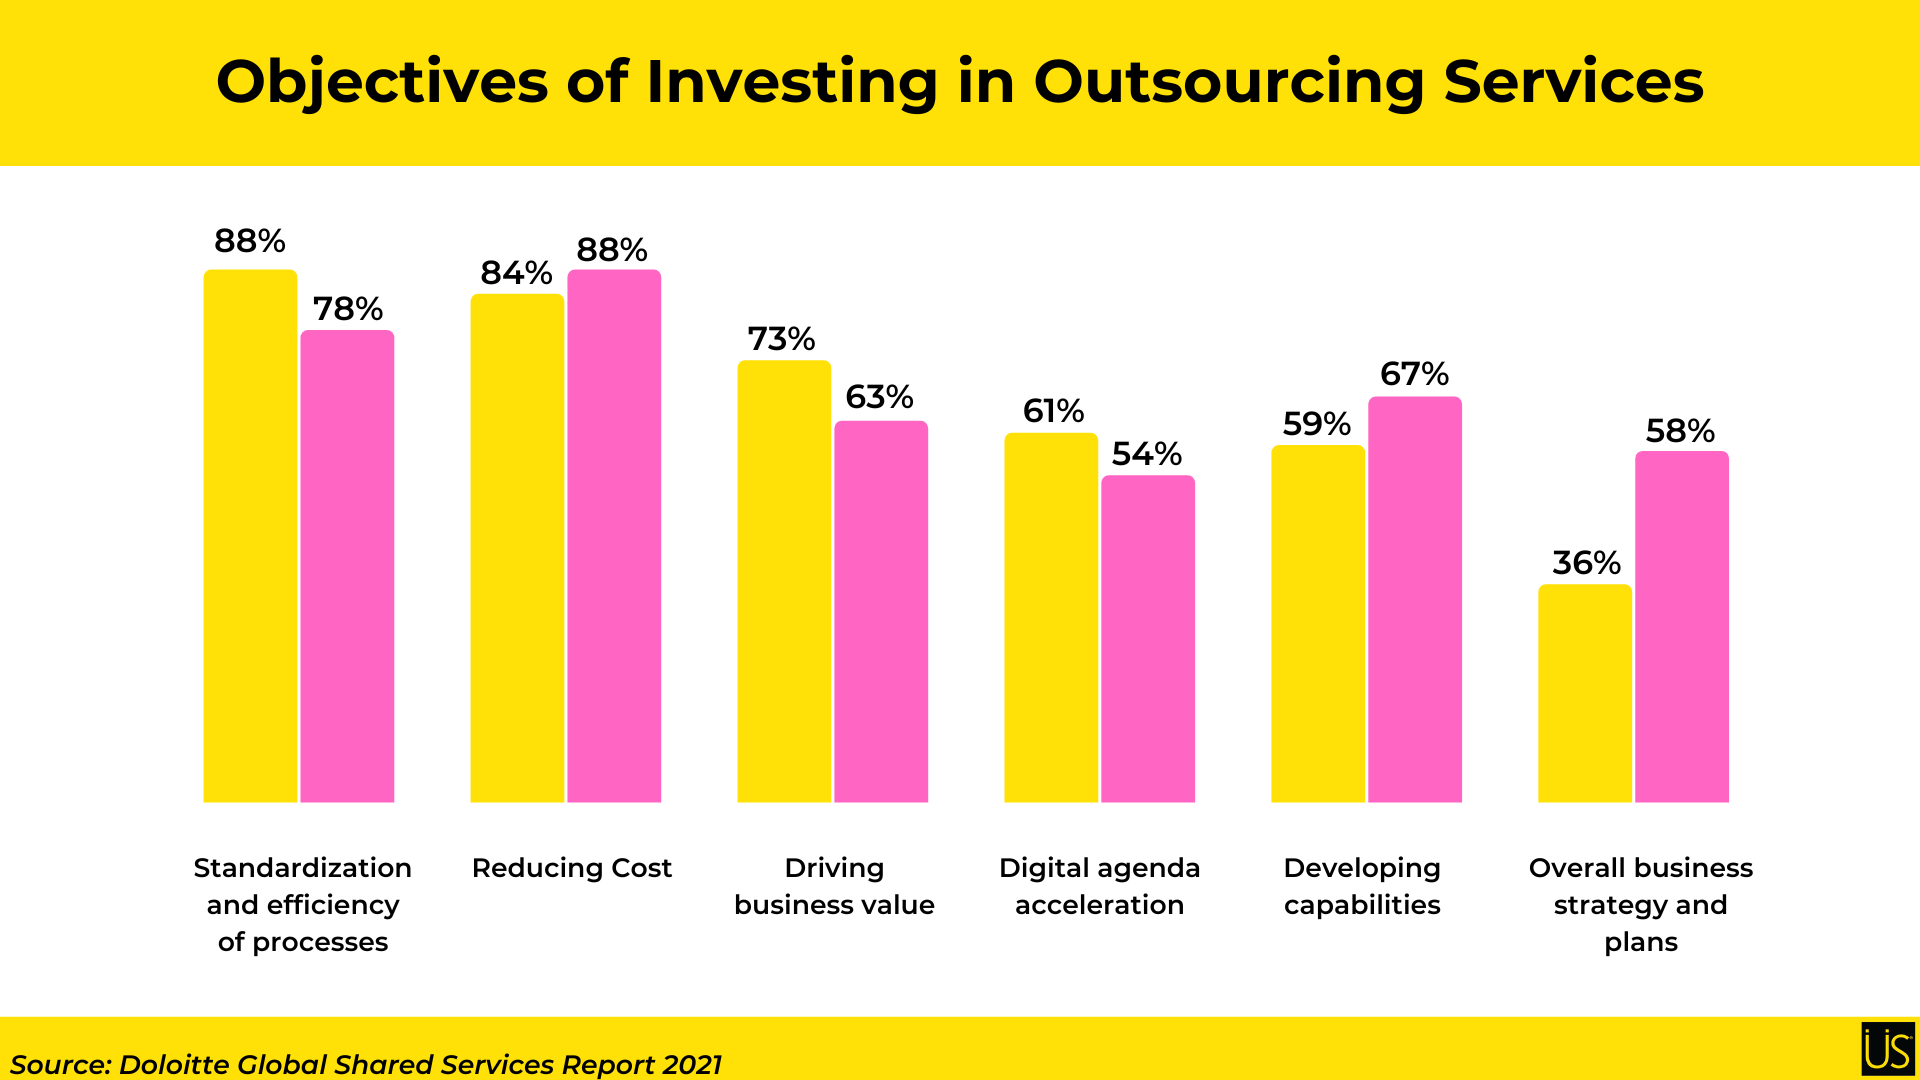 Objectives of investing in outsourcing